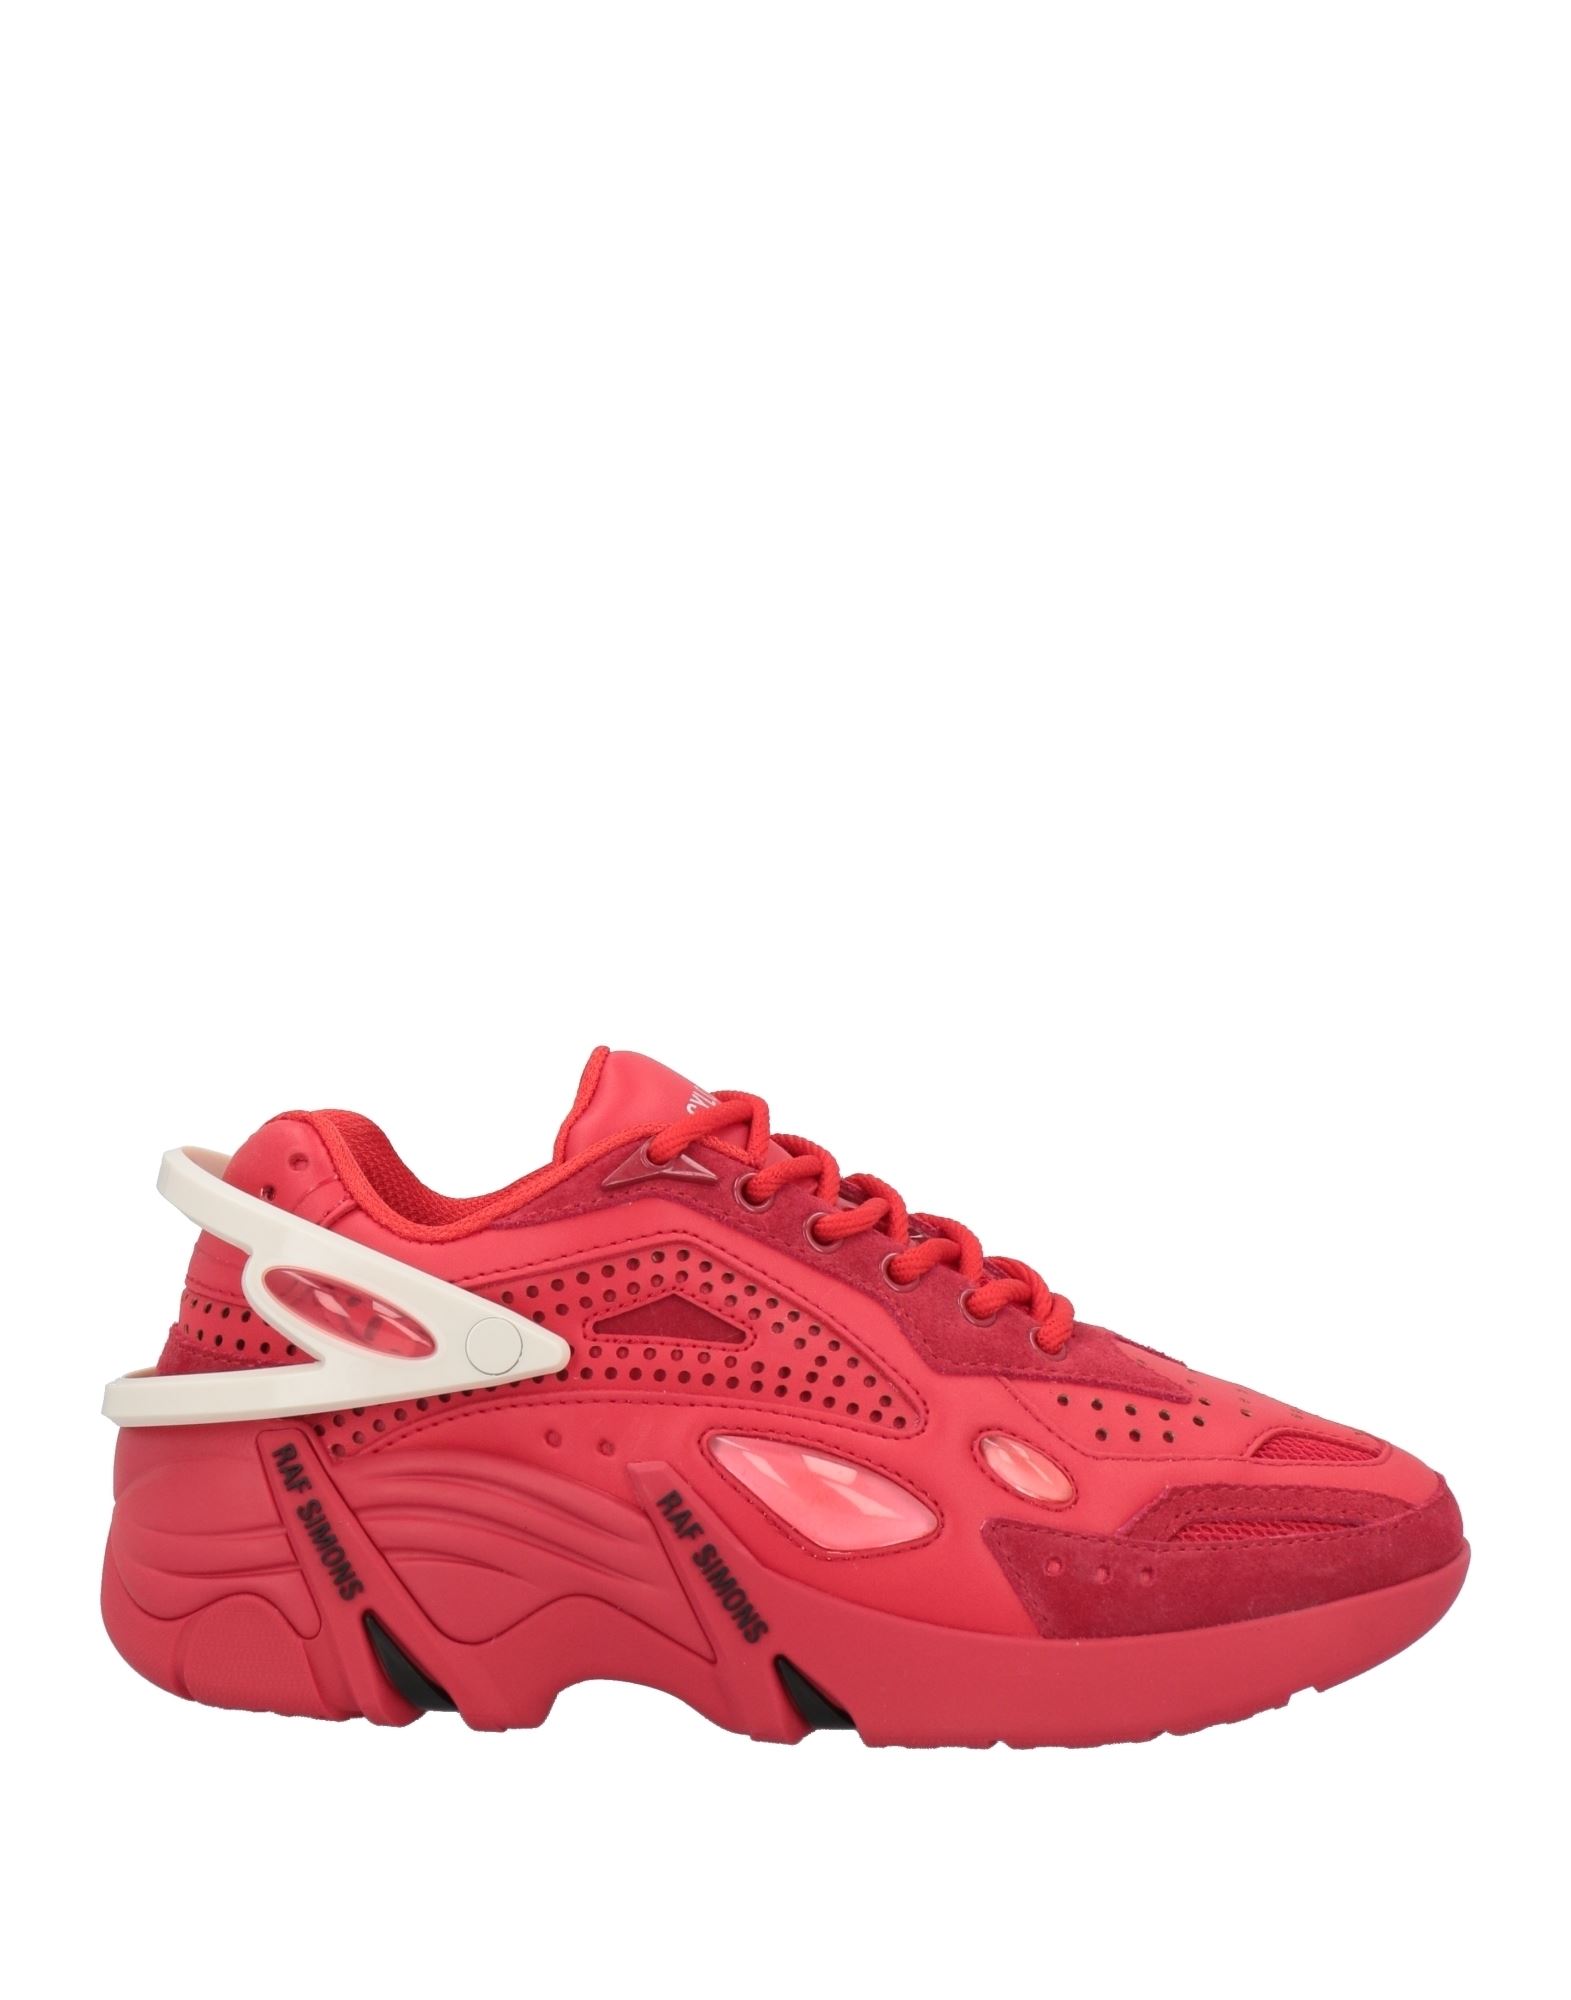 RAF SIMONS RAF SIMONS WOMAN SNEAKERS RED SIZE 6 SOFT LEATHER, TEXTILE FIBERS